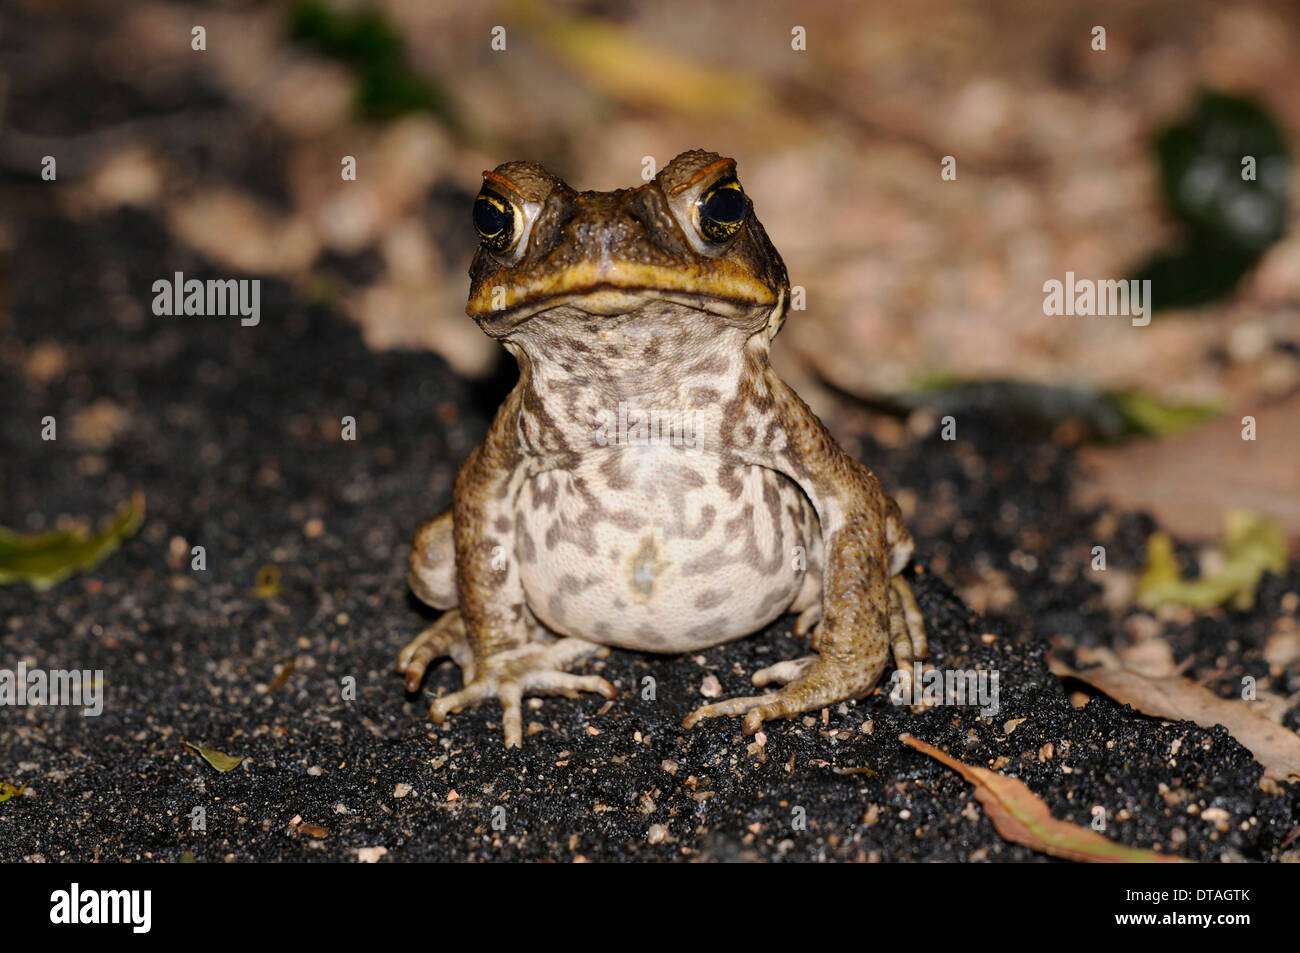 Cane toad (Rhinella marina). A serious pest in many parts of Australia, where it is an invasive species. Stock Photo